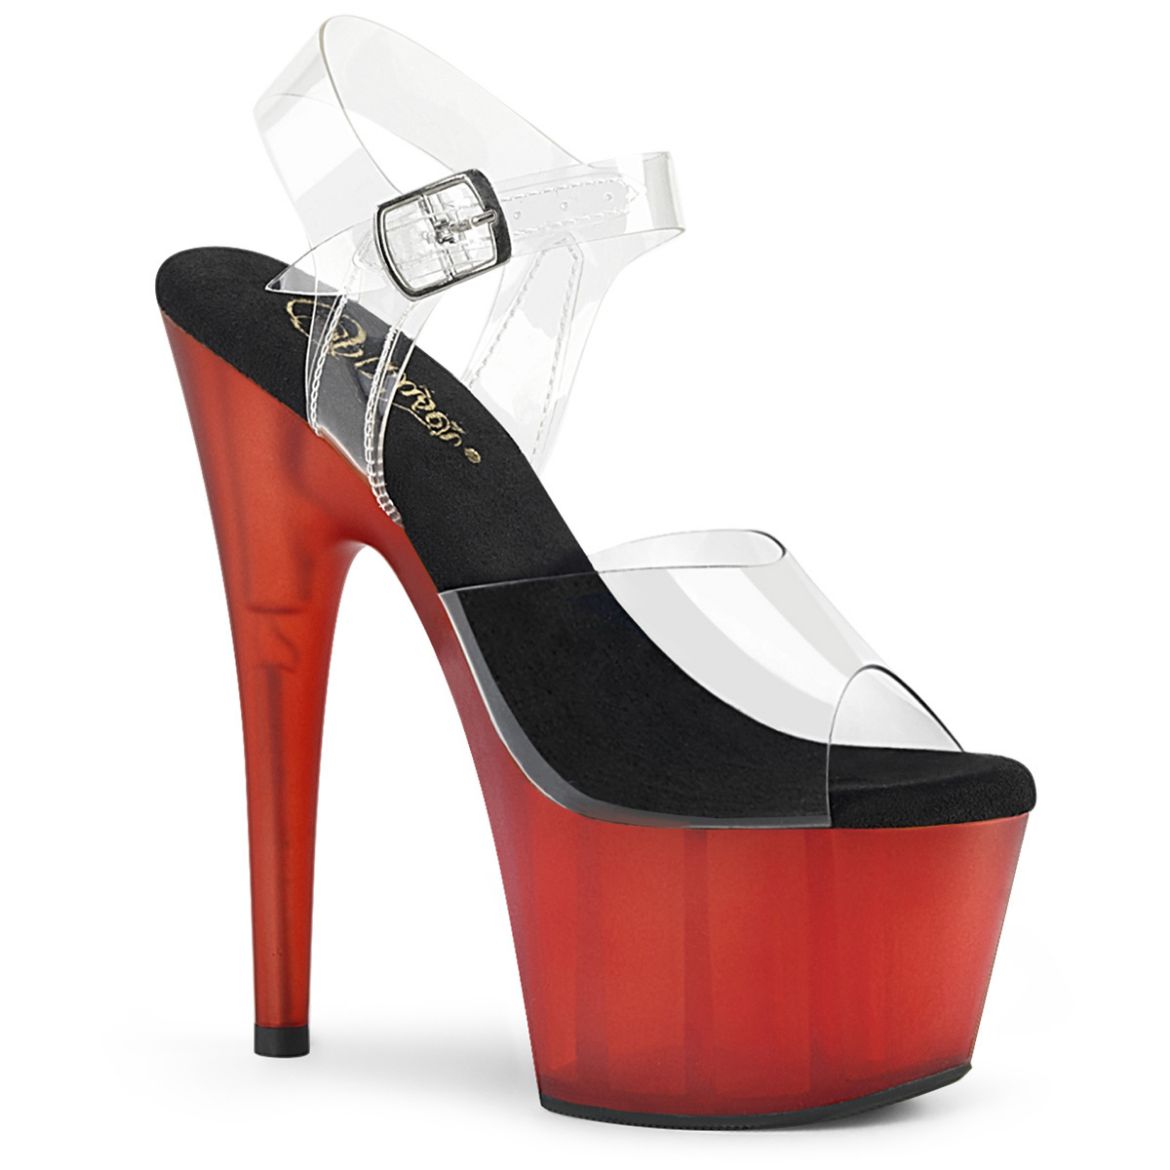 Product image of Pleaser ADORE-708T Clear/Red Frosted 7 inch (17.8 cm) Heel 2 3/4 inch (7 cm) Tinted Platform Ankle Strap Sandal Shoes